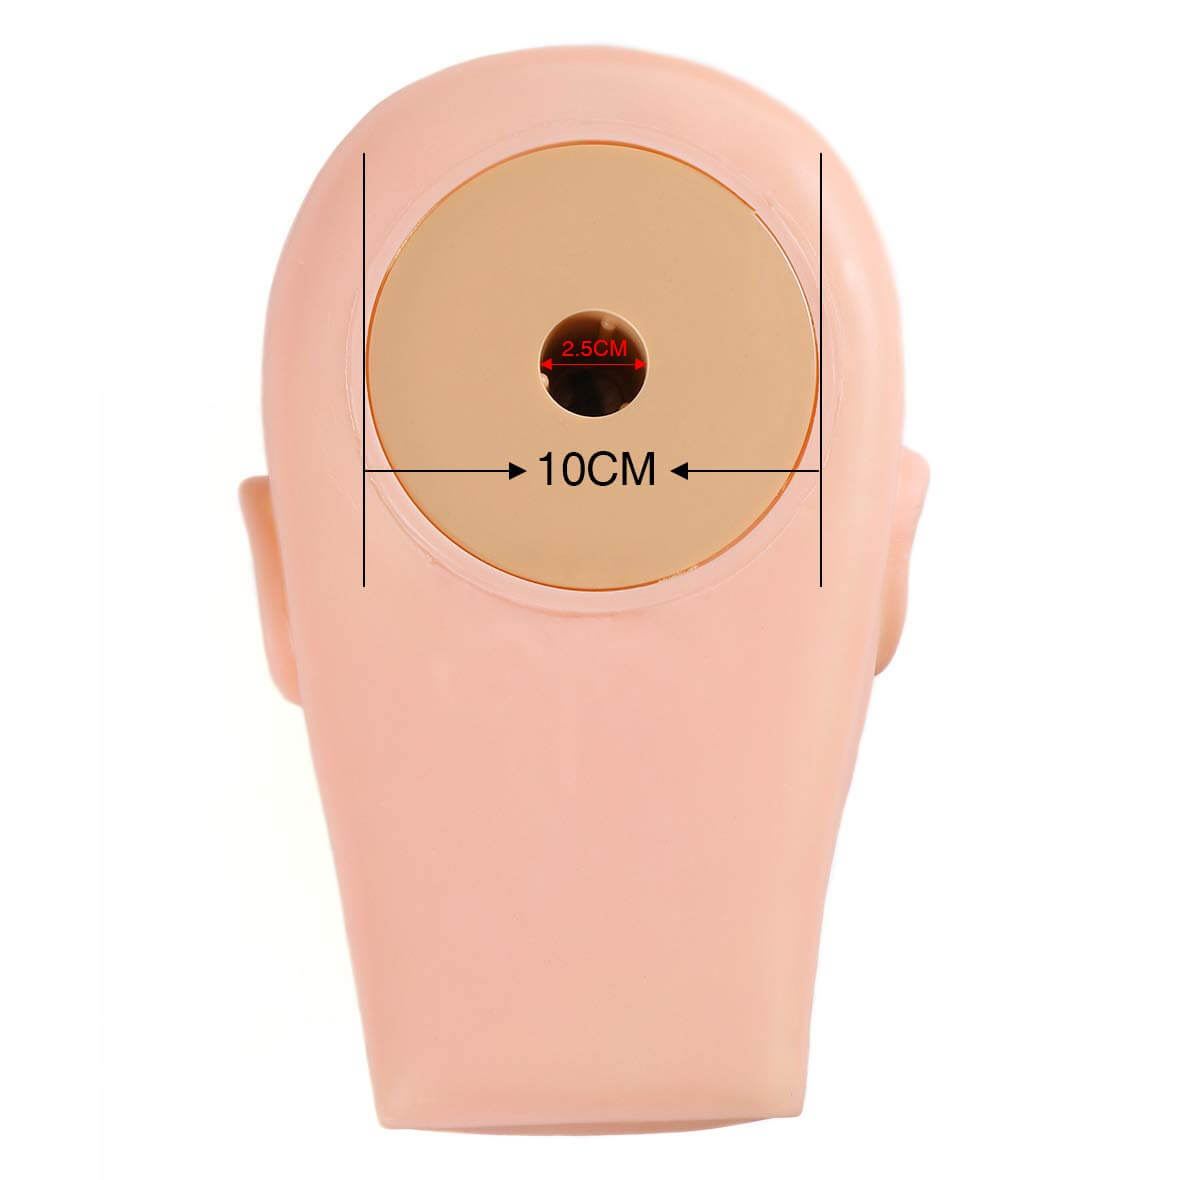 Mannequin Head Rubber Practice Training Head Cosmetology Mannequin Doll Face Head for Eyelashes Makeup Practice Head